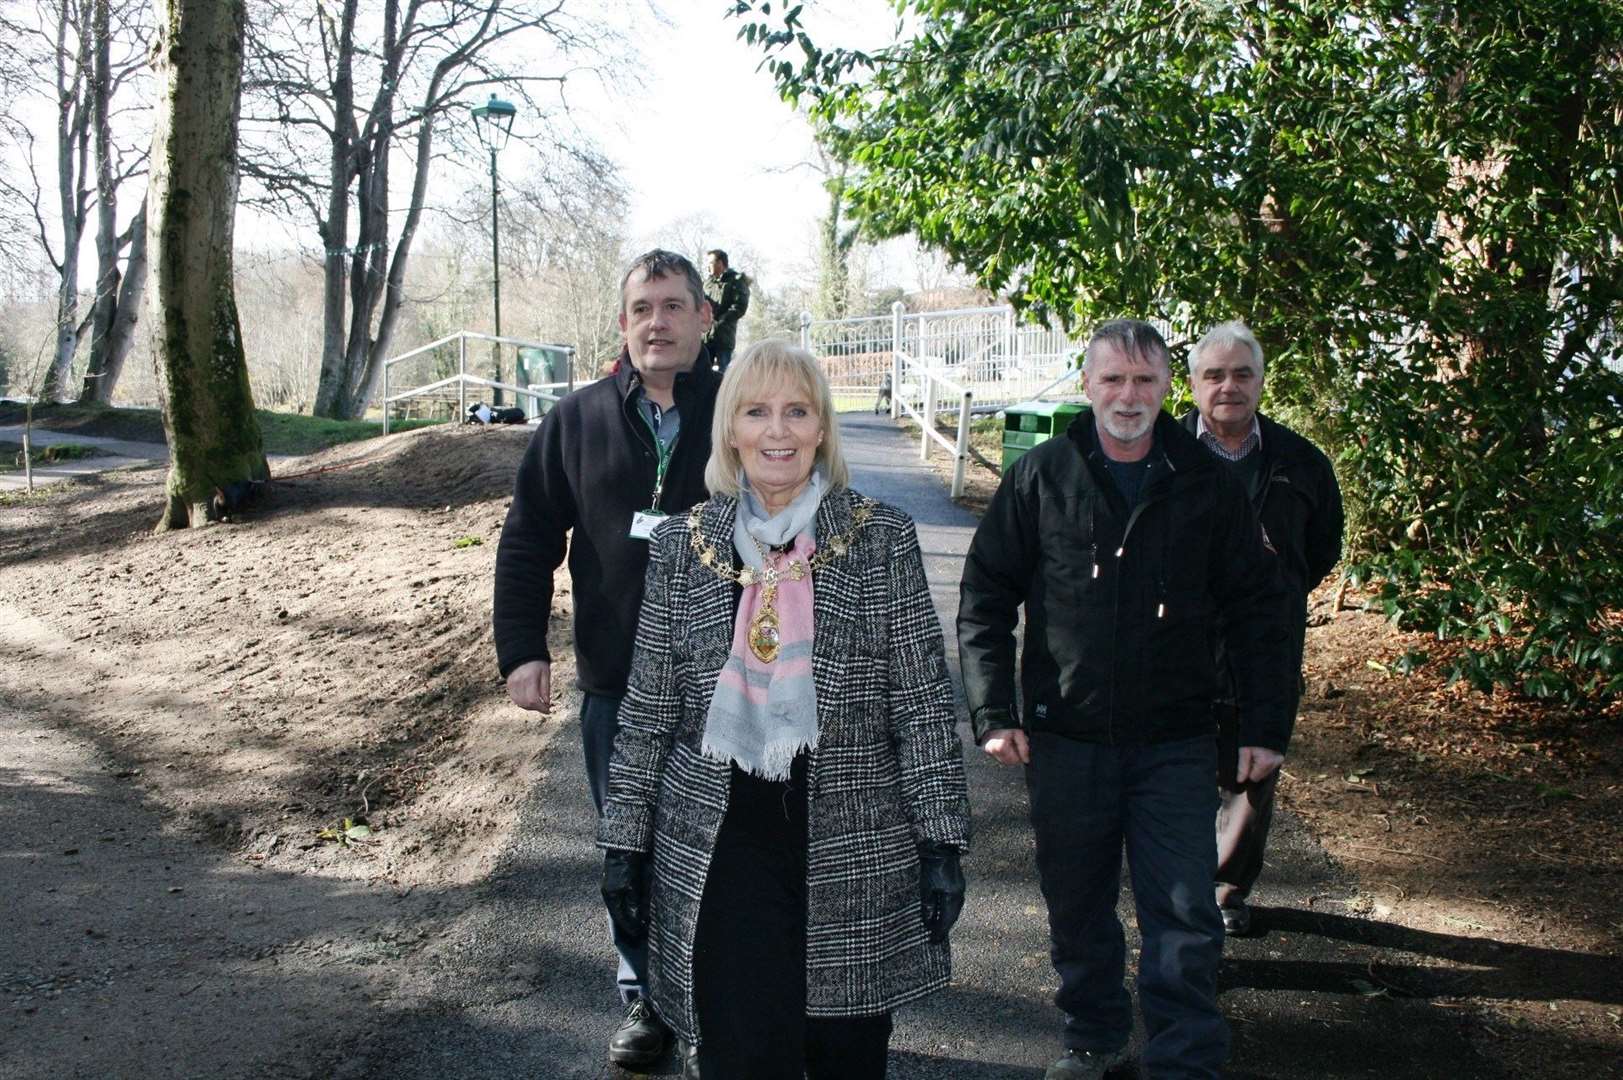 Pictured showing Inverness Provost Helen Carmichael the improved access at the Silver Wells Bridge are L to R - the Council’s Amenities Officer Peter Kelly with Mike Brandon and Graham Fettes from Brandon Landscaping.